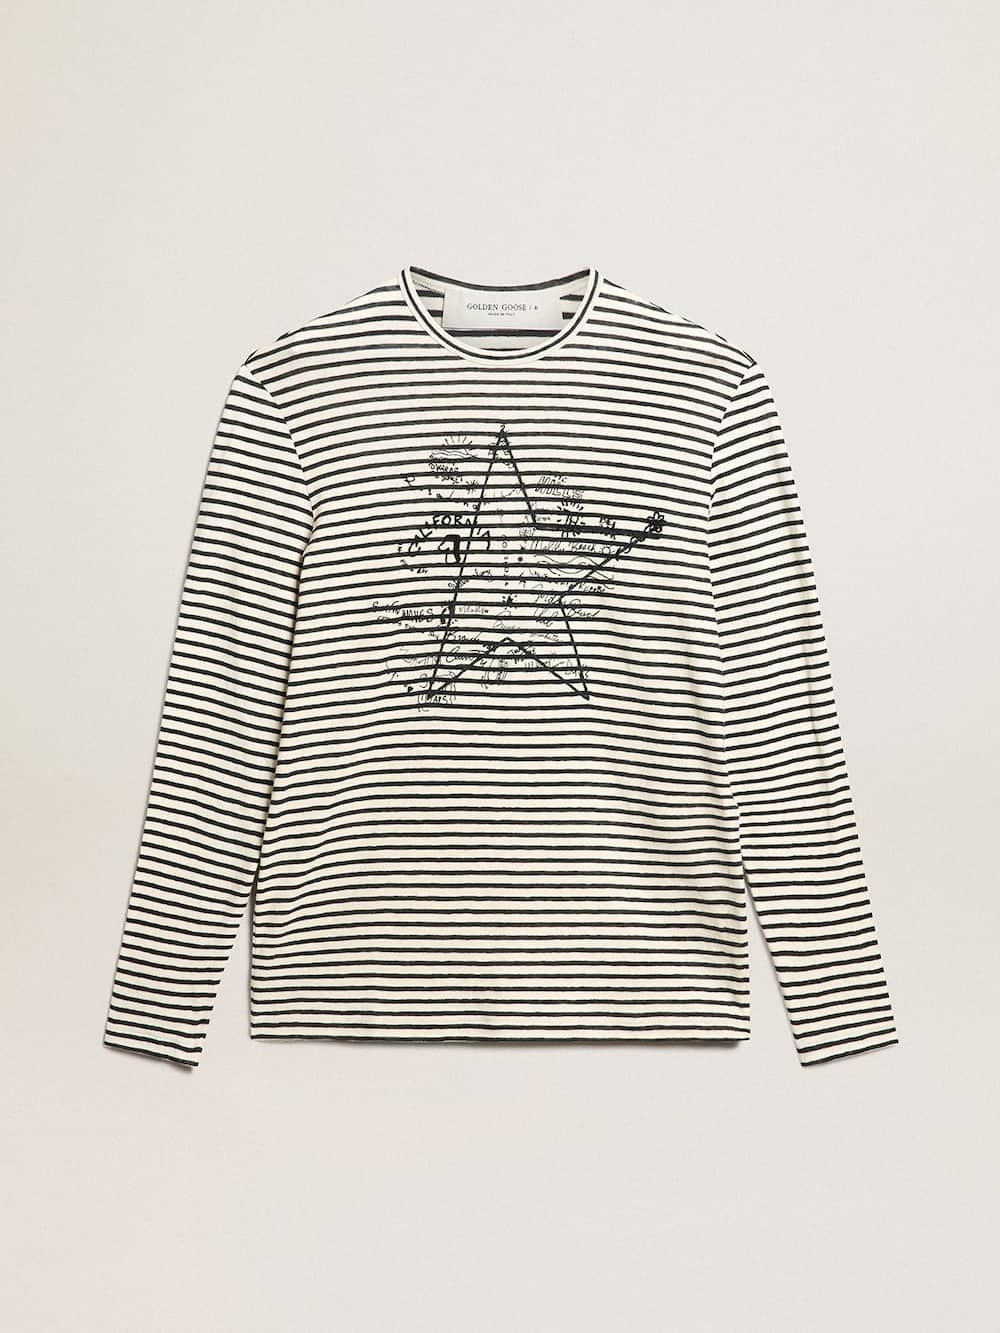 Golden Goose - Men's T-shirt with white and blue stripes and embroidery on the front in 